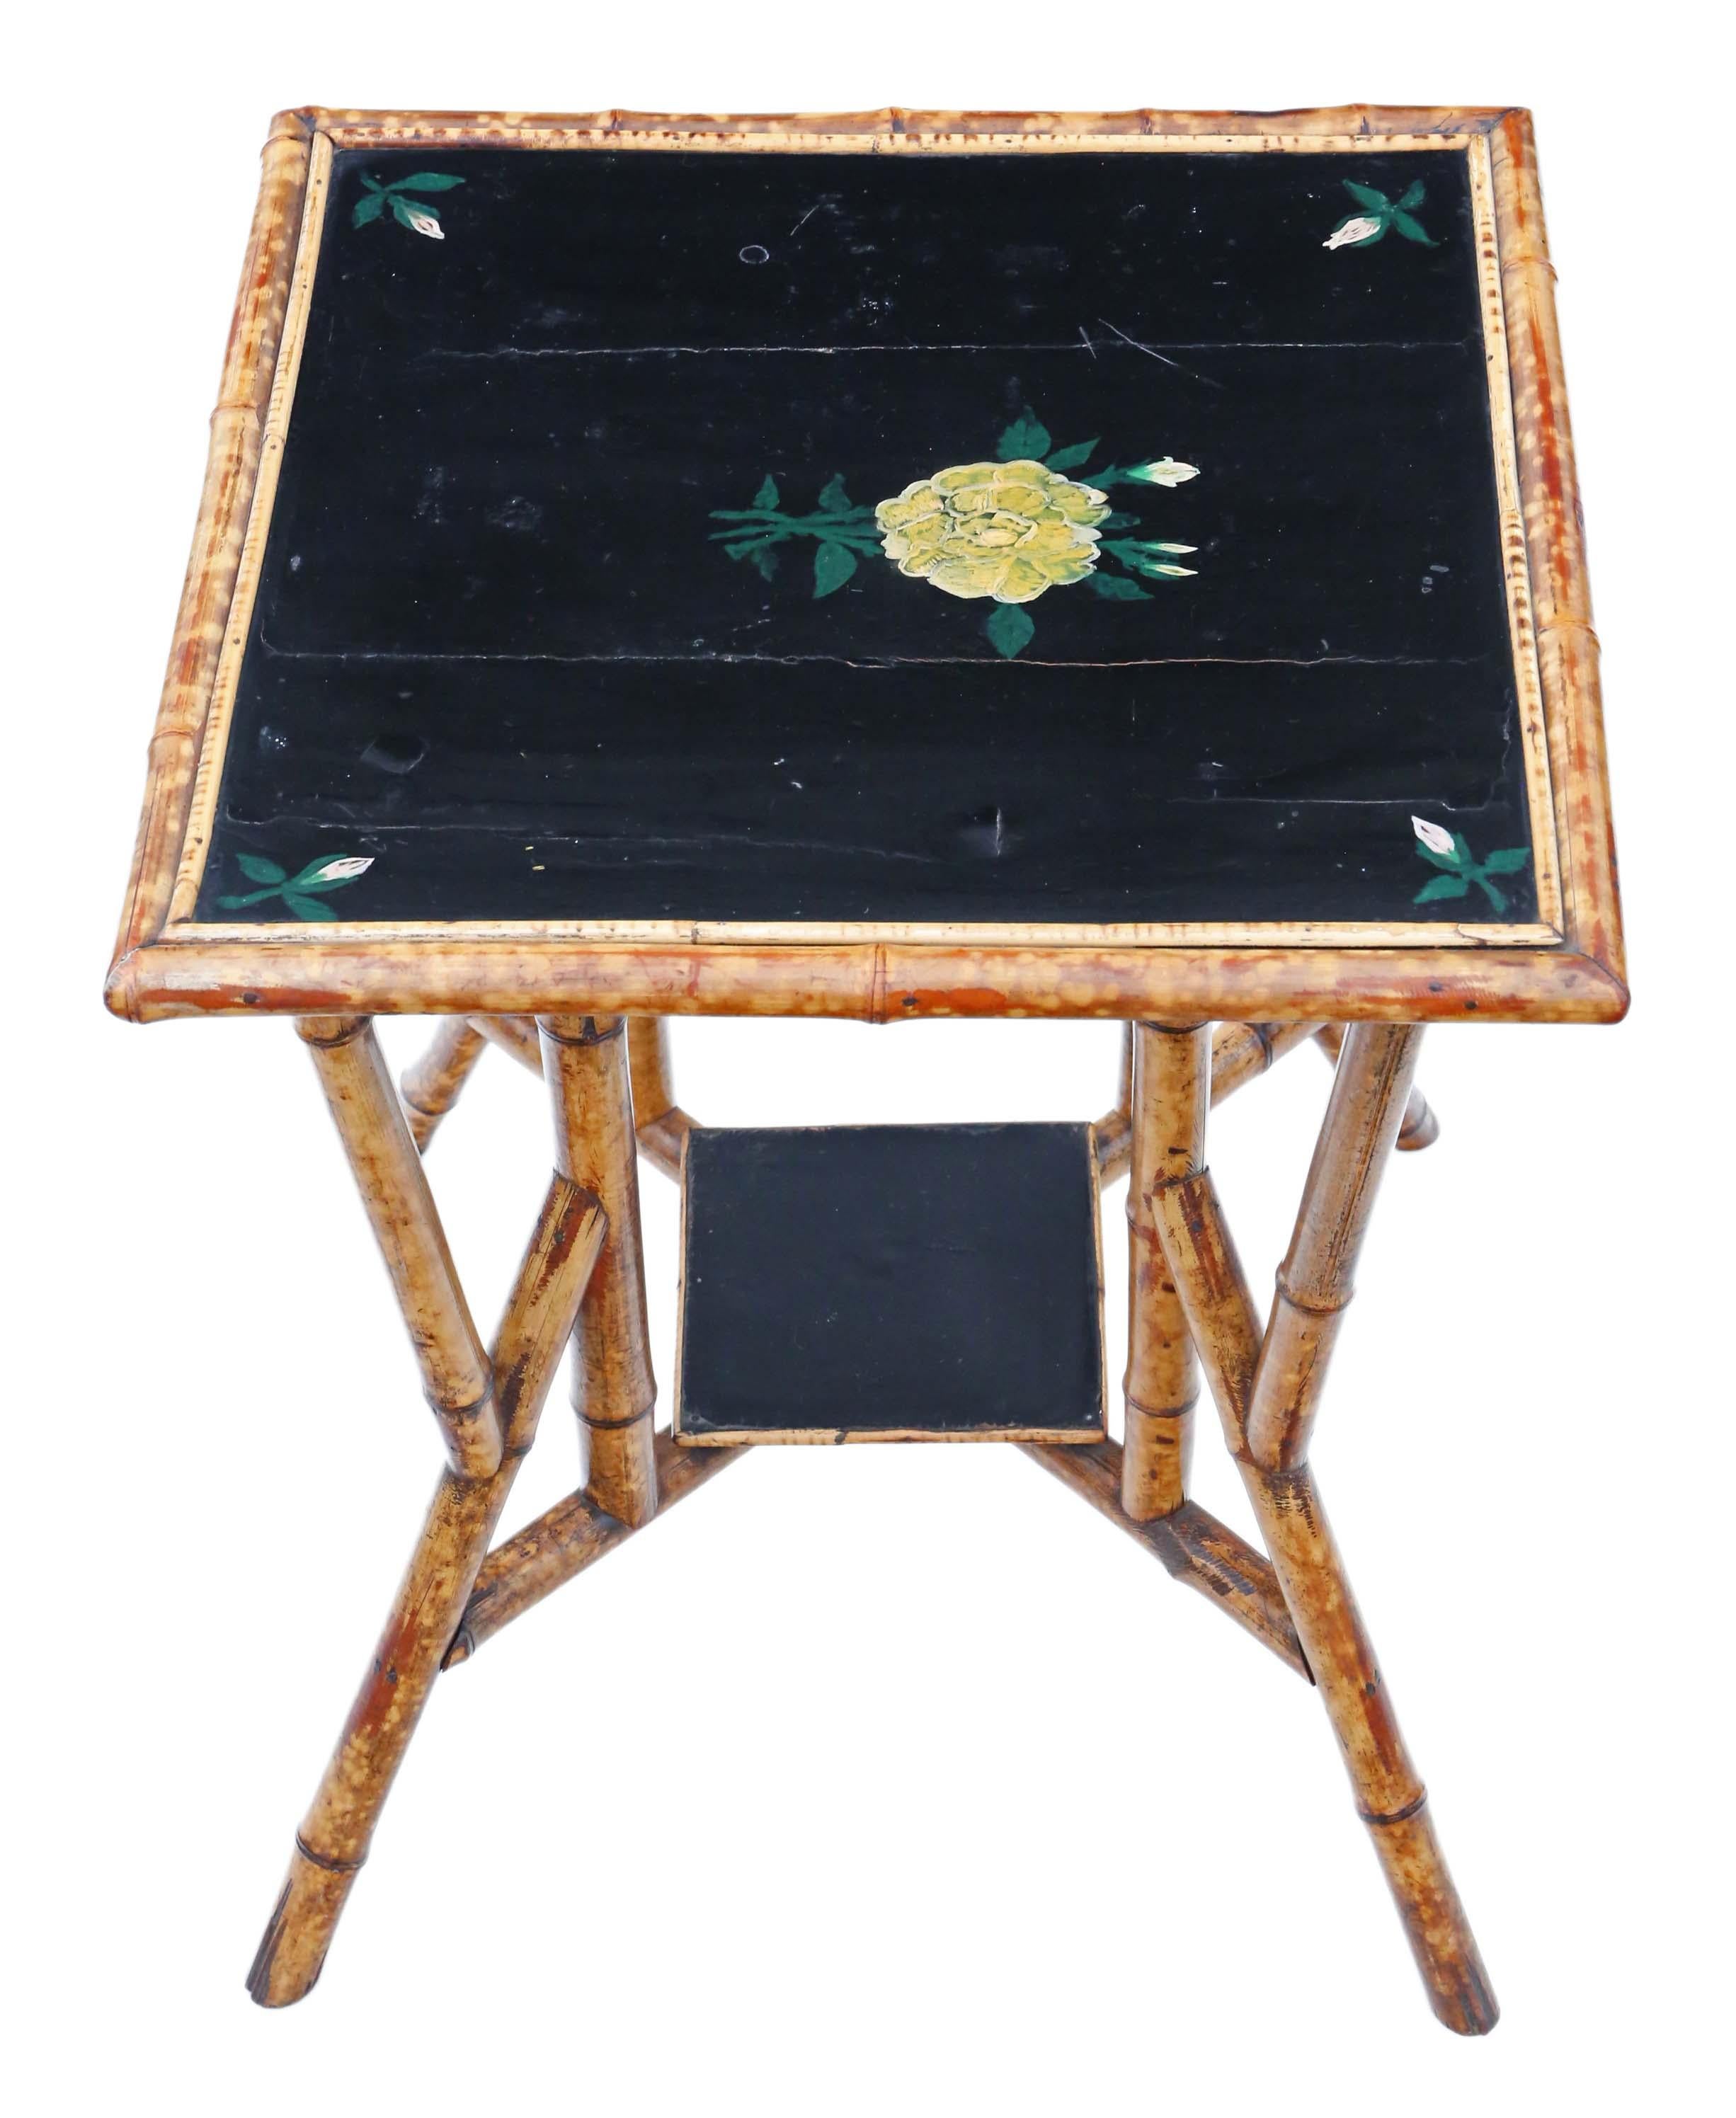 Antique quality C1900 bamboo black lacquer occasional window table.

No loose joints and no woodworm. An abundance of character and charm. A rare decorative find.

Would look great in the right location!

Overall maximum dimensions: 60cmW x